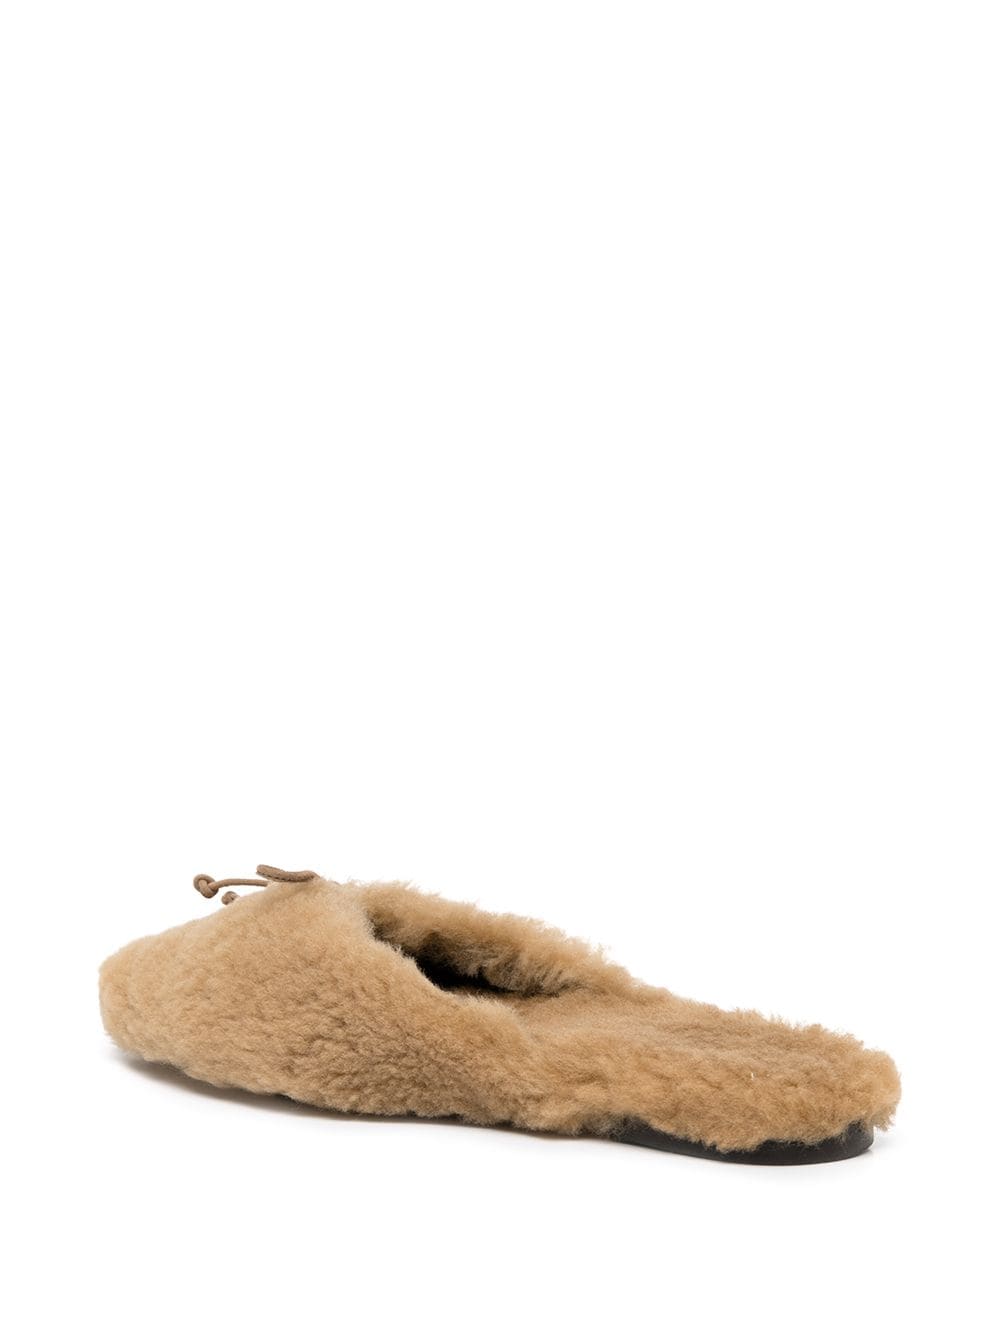 STAUD, Shoes, Staud Gina Shearling Mules Size 55